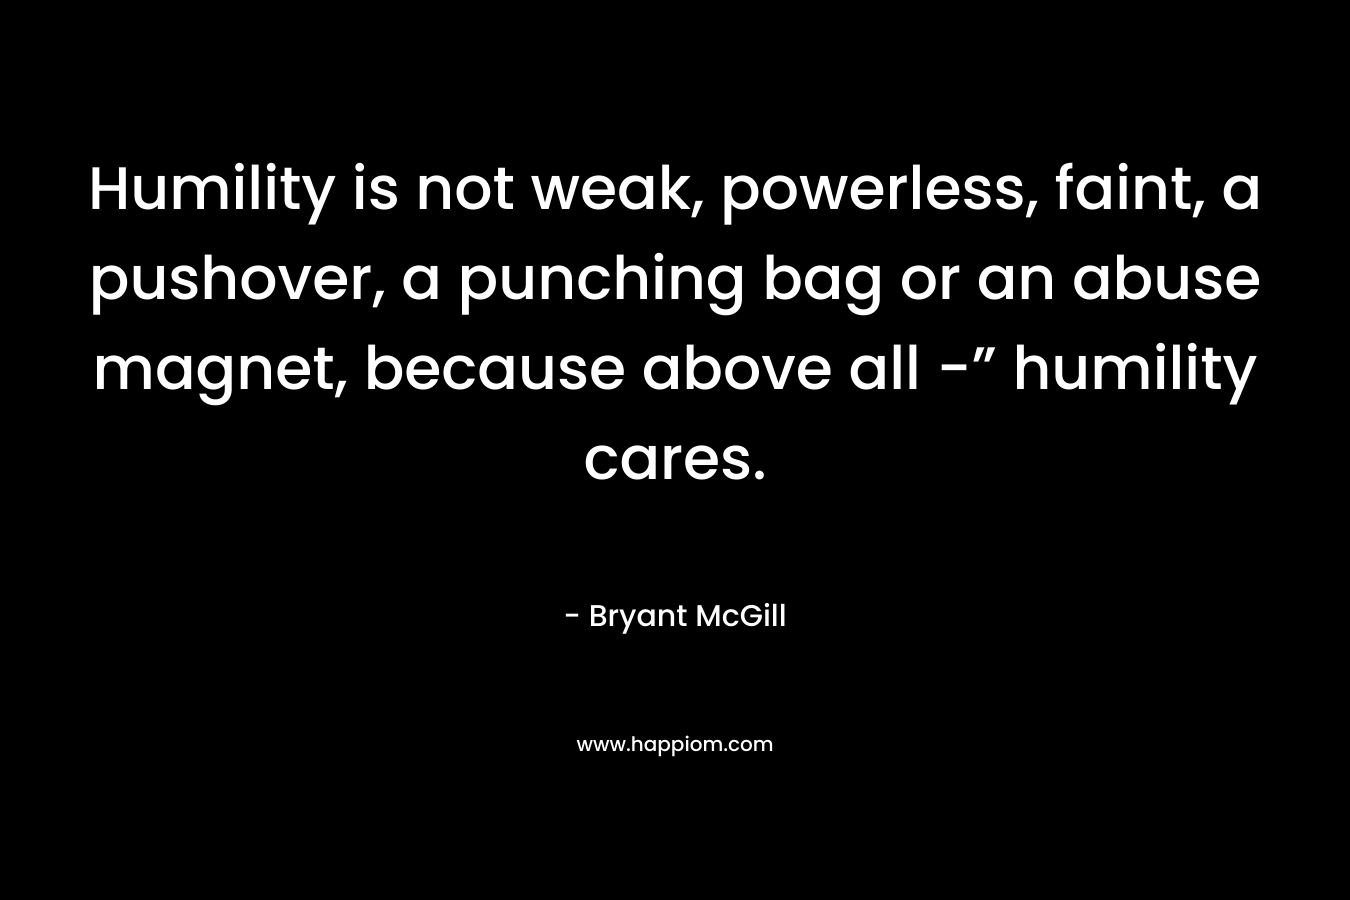 Humility is not weak, powerless, faint, a pushover, a punching bag or an abuse magnet, because above all -” humility cares. – Bryant McGill